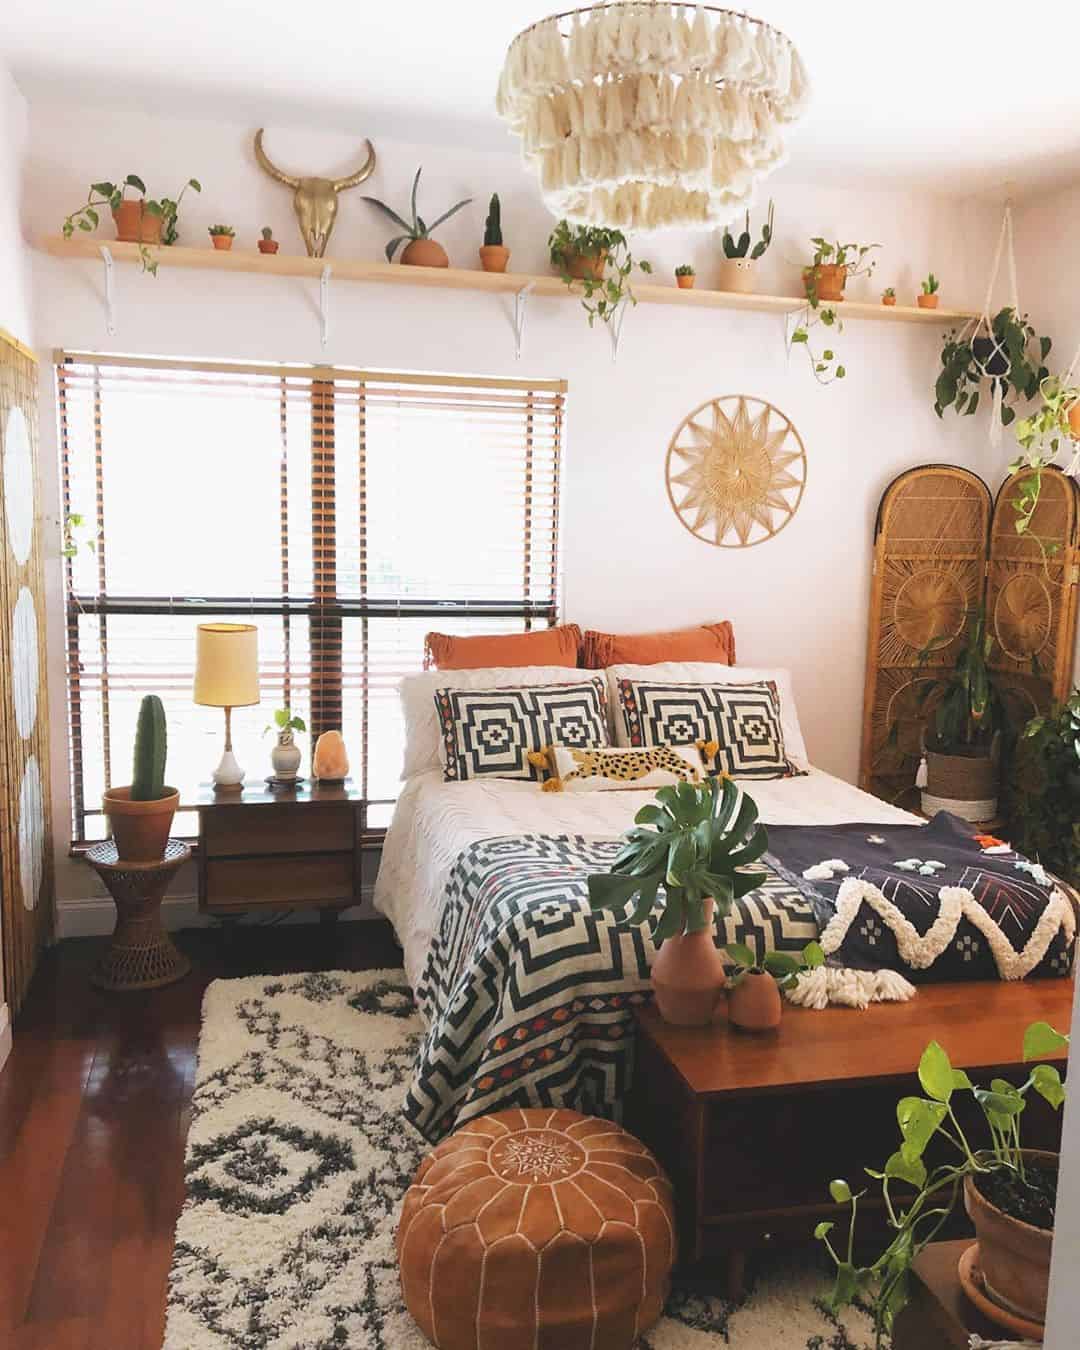 Simple Bohemian Bedroom Ideas for Small Space